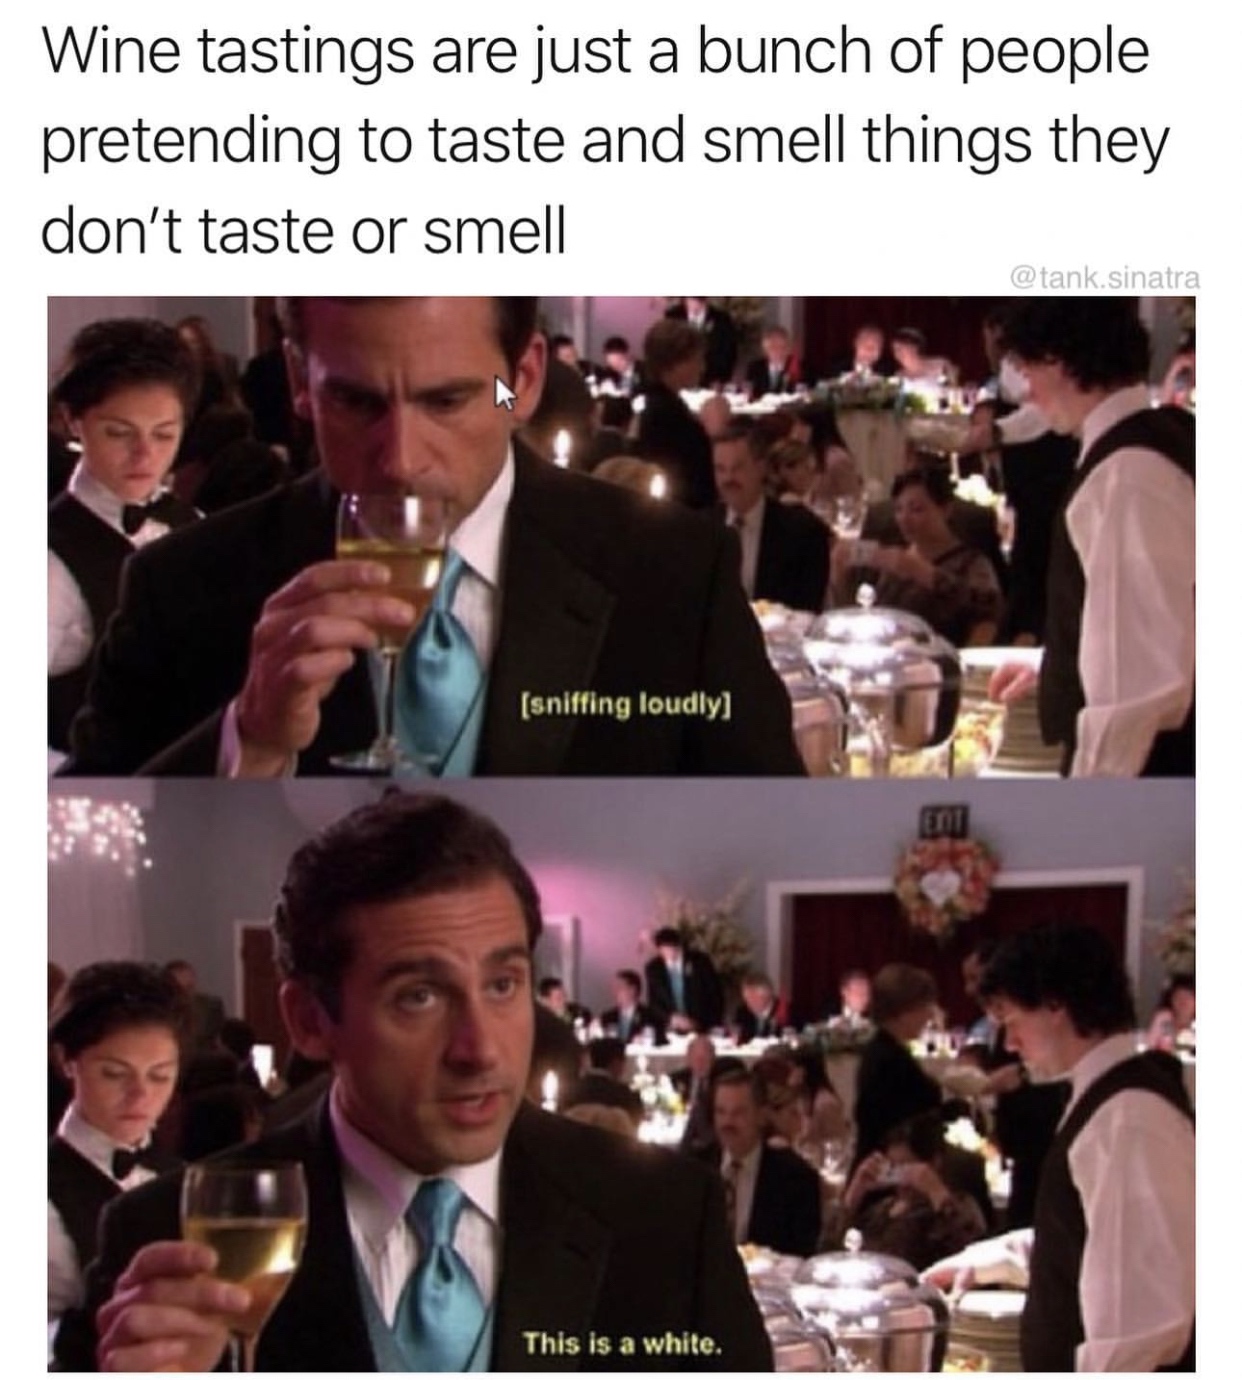 funny wine tasting memes - Wine tastings are just a bunch of people pretending to taste and smell things they don't taste or smell .sinatra sniffing loudly This is a white.